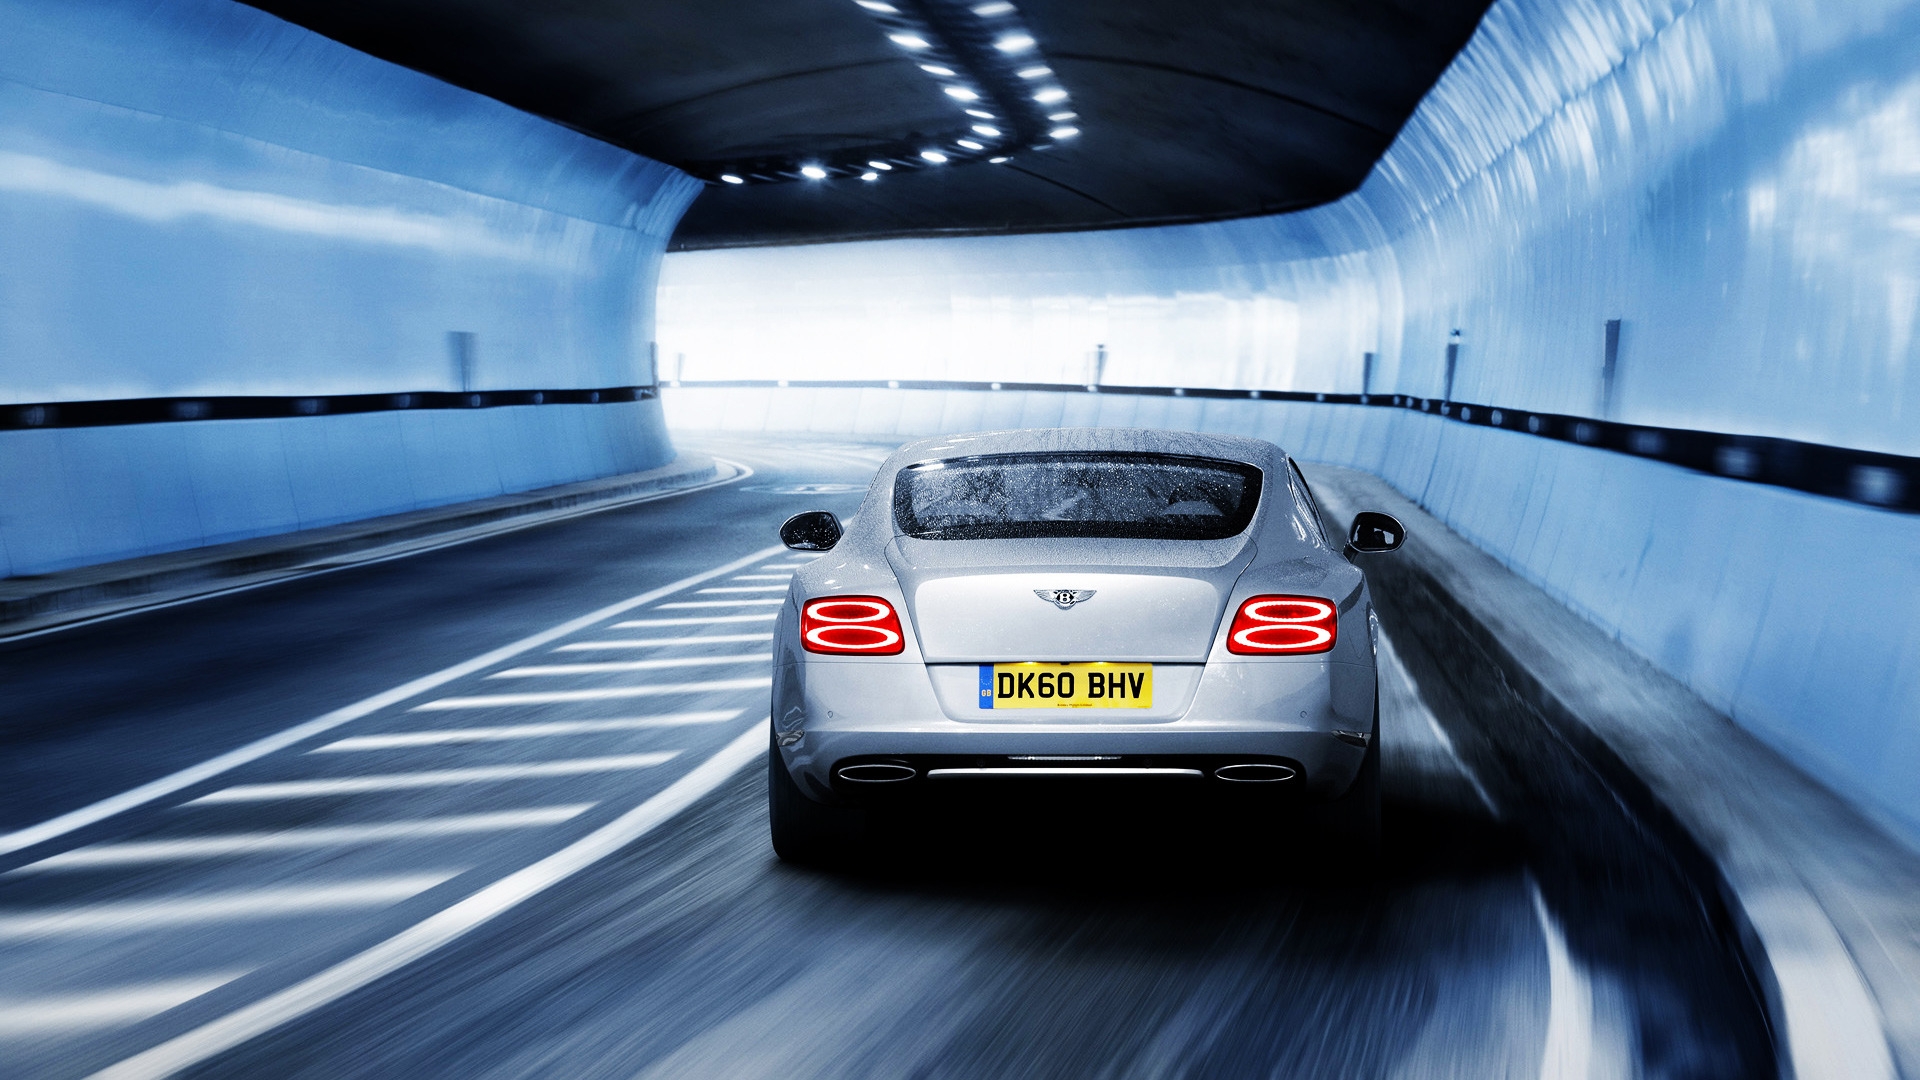 2011 Bentley Continental GT Rear for 1920 x 1080 HDTV 1080p resolution